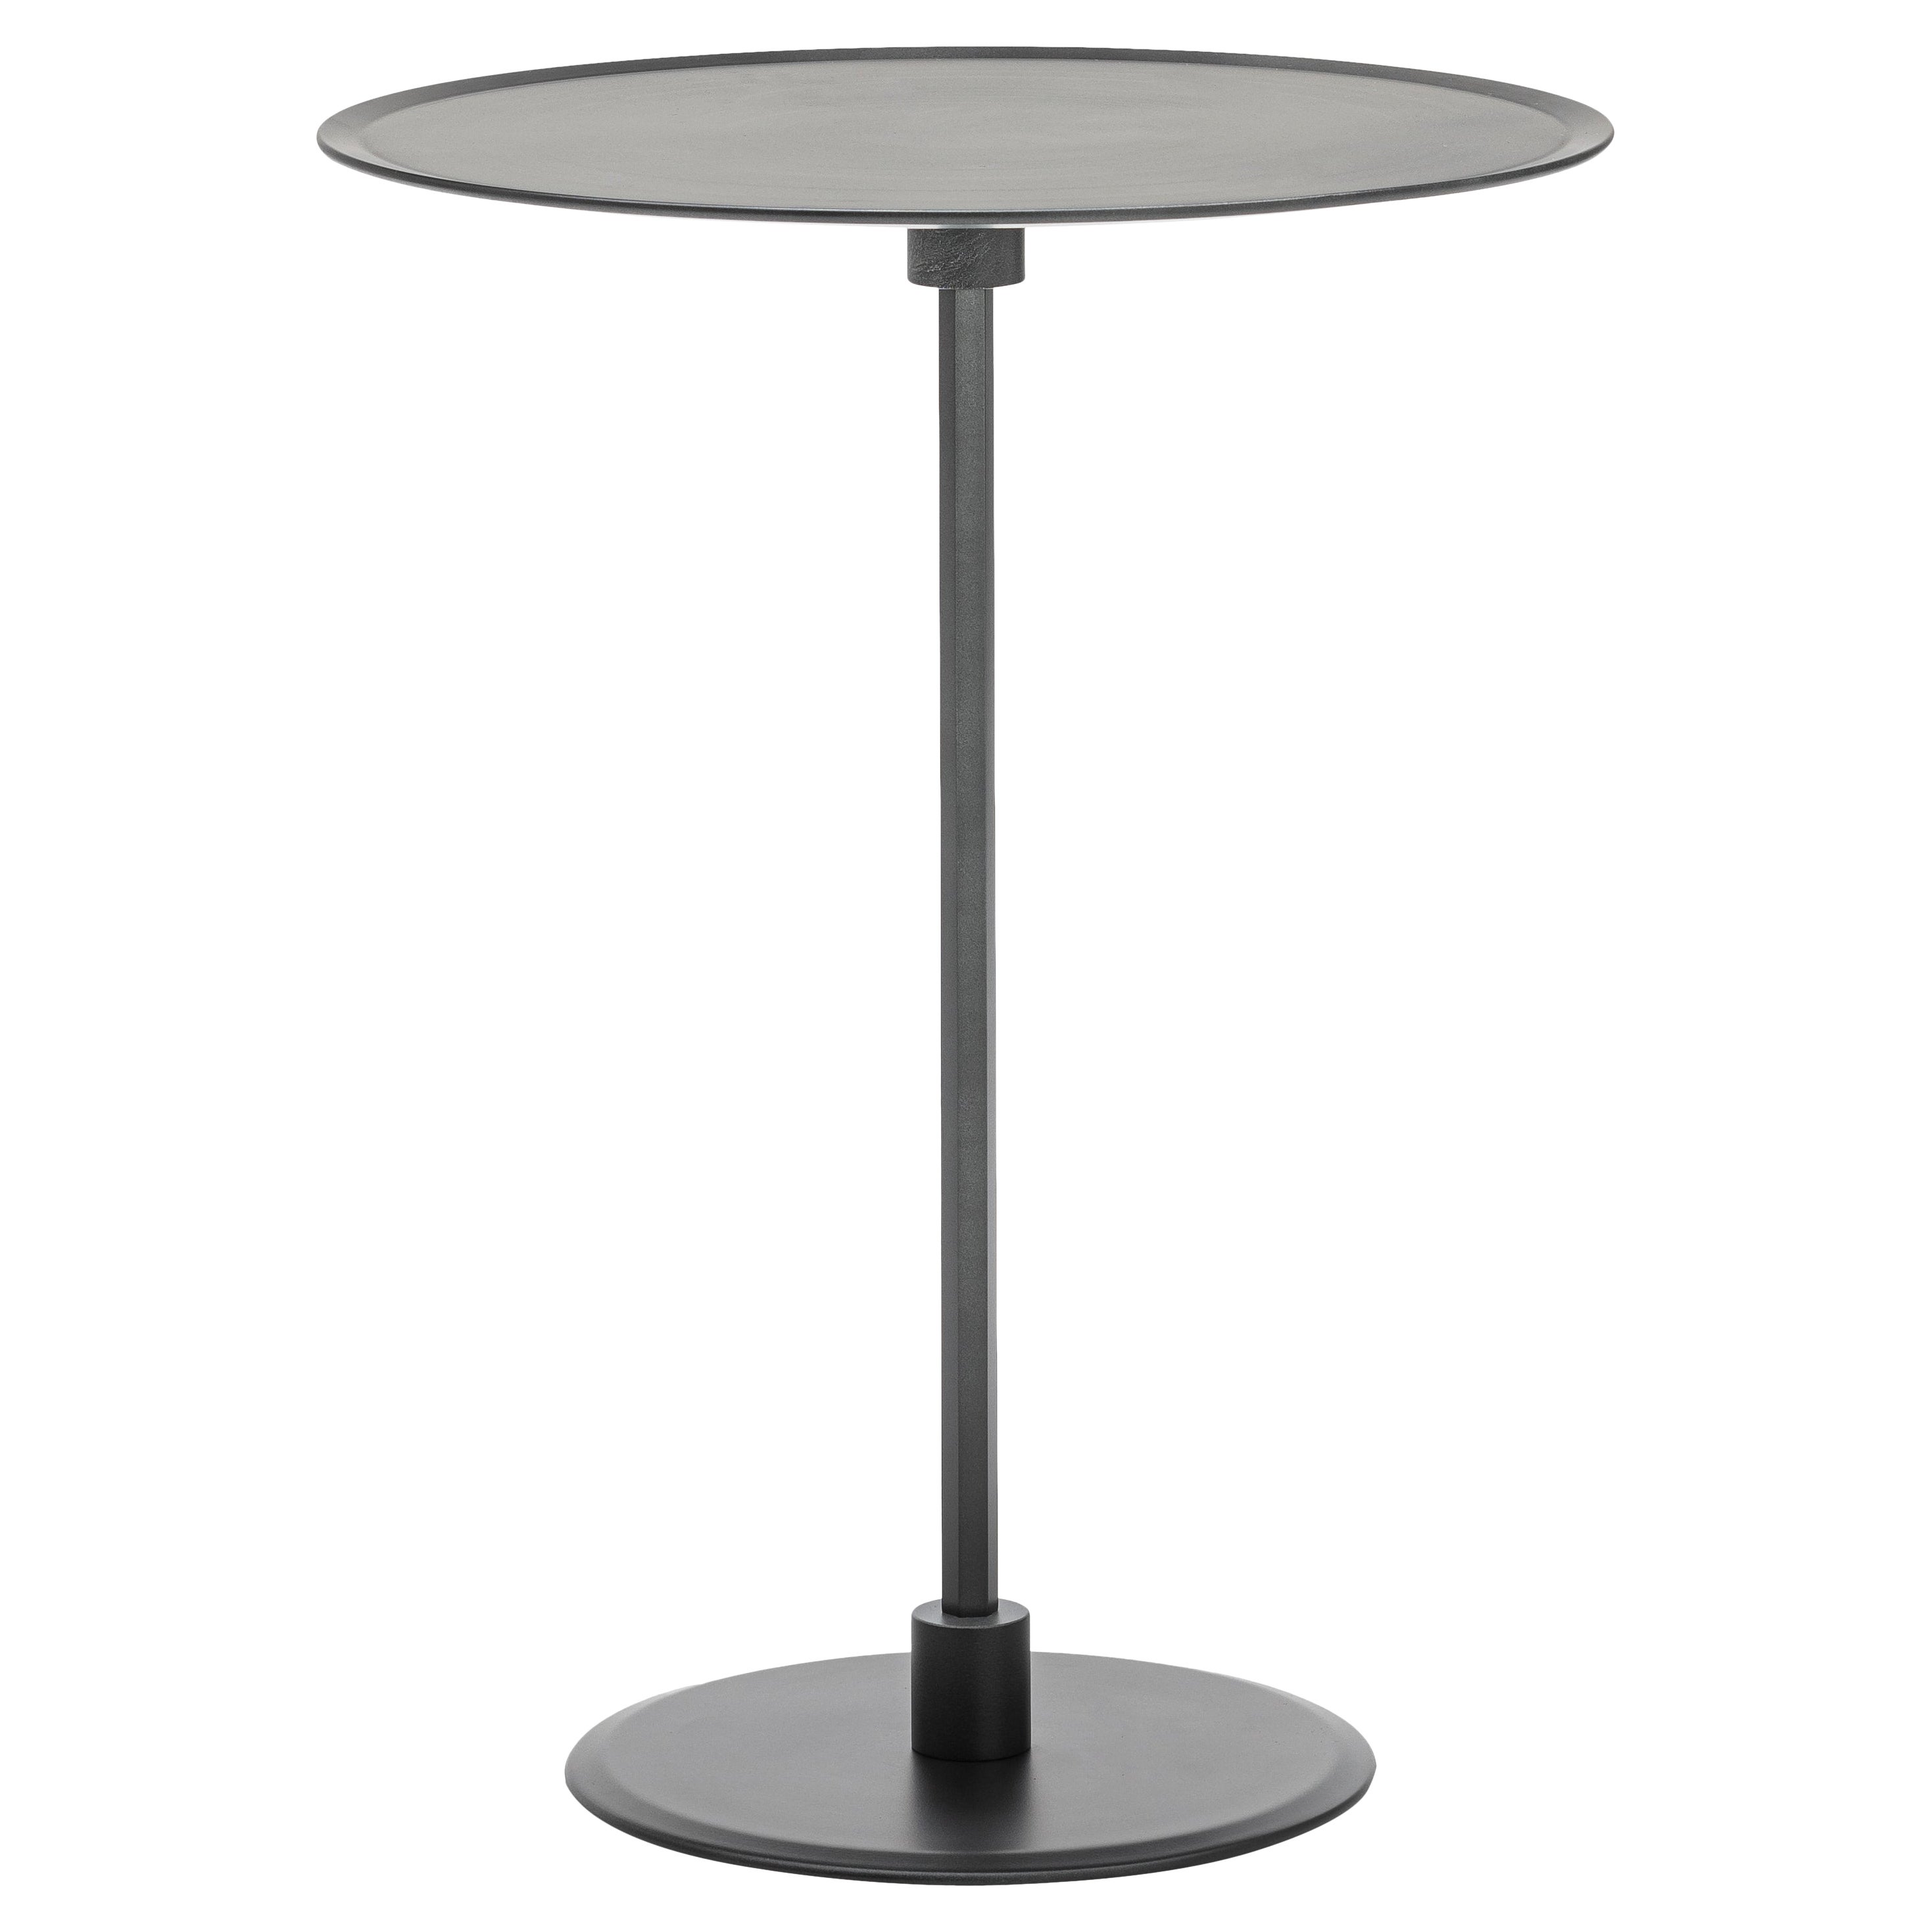 Acerbis Large Gong Side Table in Matt Painted Gunmetal Top with Frame For Sale